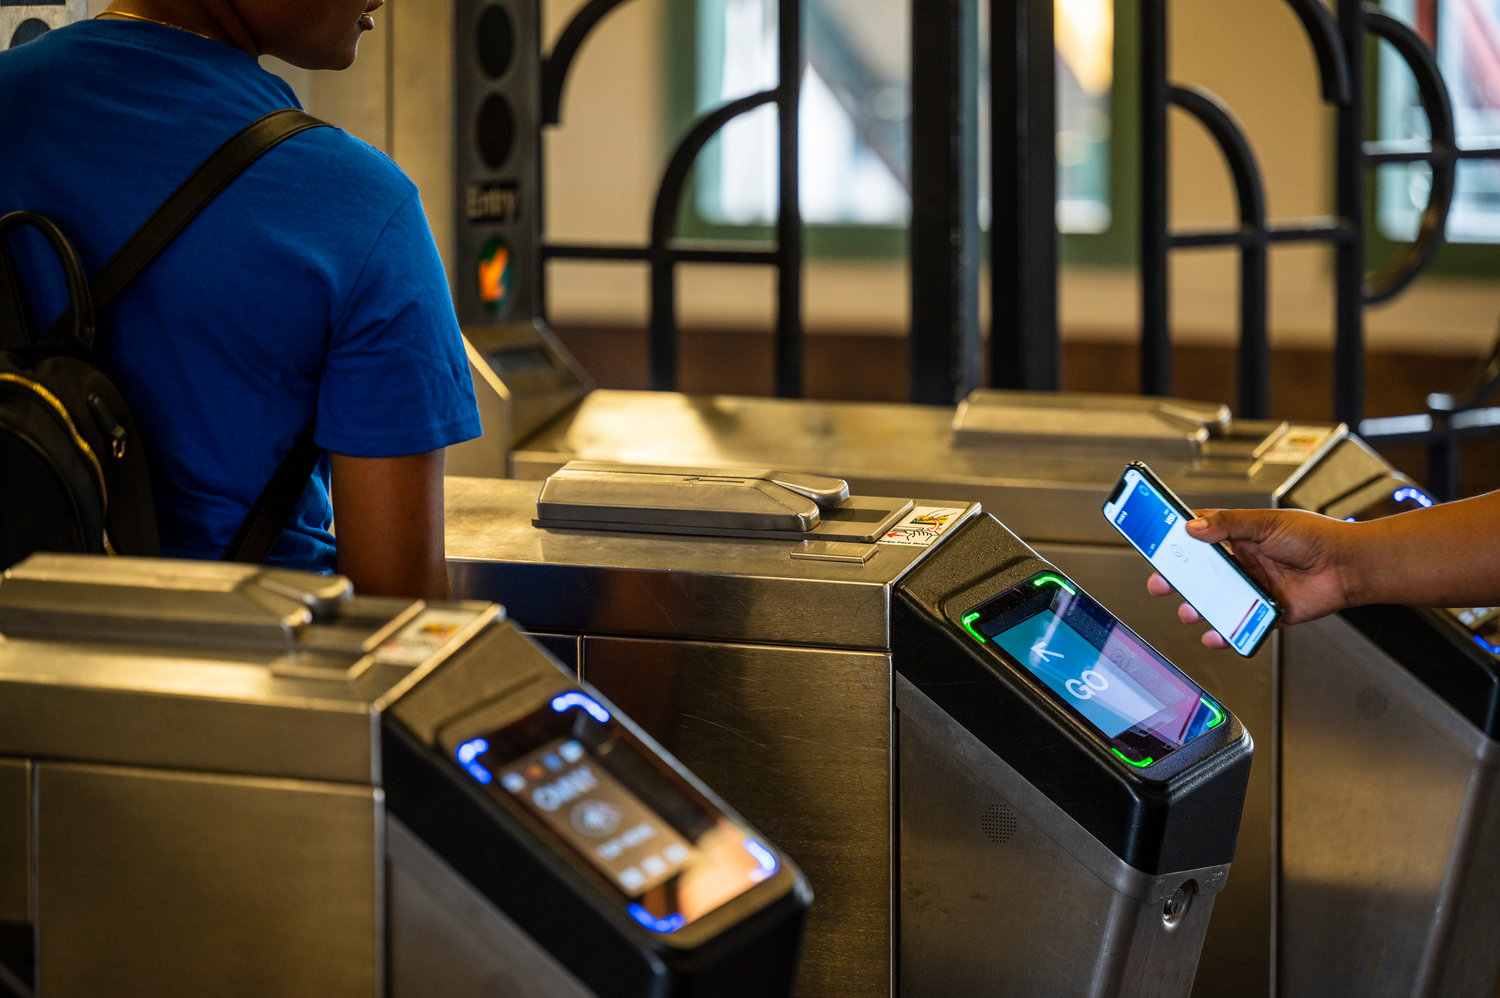 There are reports that one in every six commuters flash their smartphone or bankcard to pay subway and bus fares through OMNY. But are touch-free — and cashless — fares the way to the future? Some transit advocates say no.